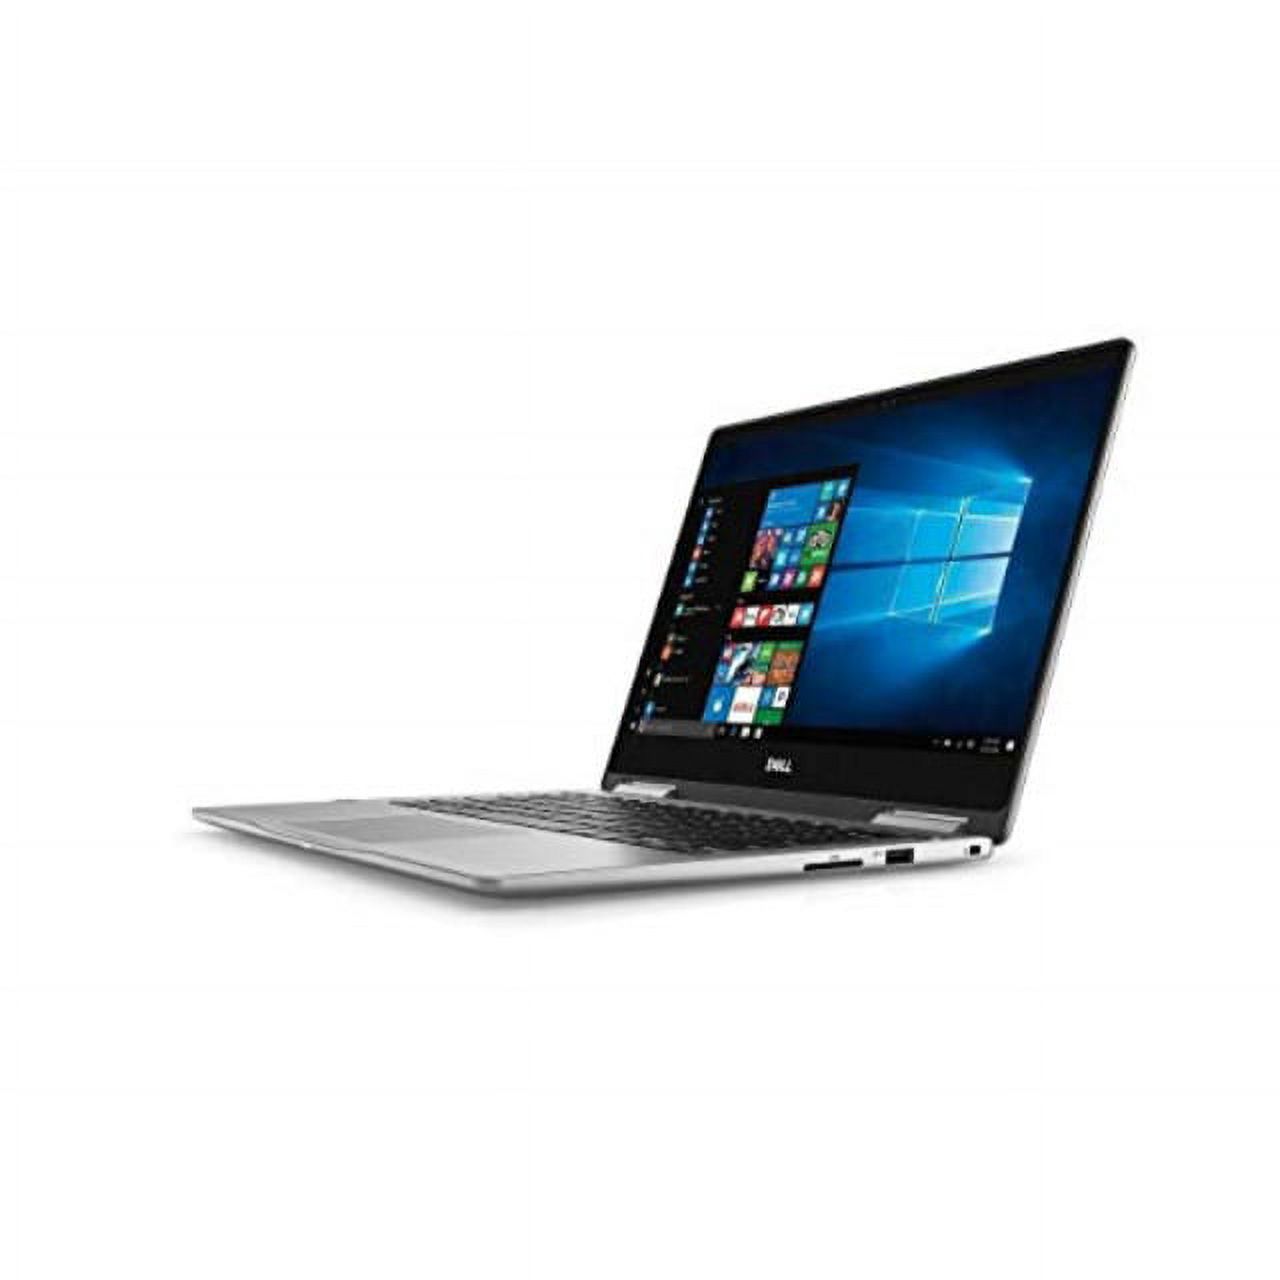 Restored Dell Inspiron 2-in-1 13.3" Touch-Screen Laptop i5-8250U 8GB RAM 256GB SSD (Refurbished) - image 1 of 1